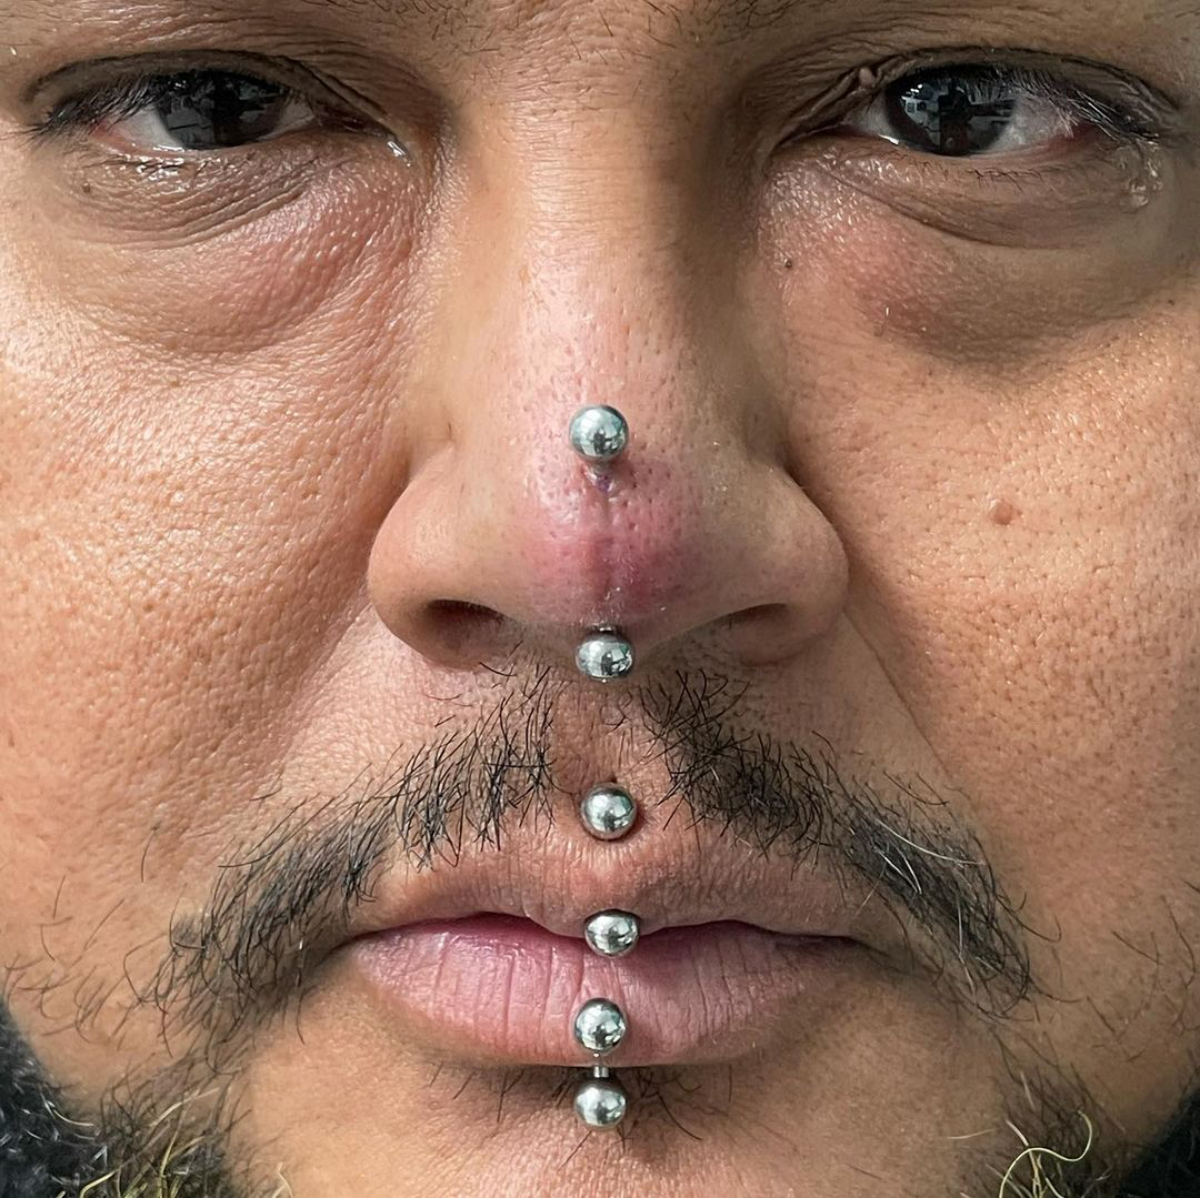 7 man with multiple piercings on nose and mouth